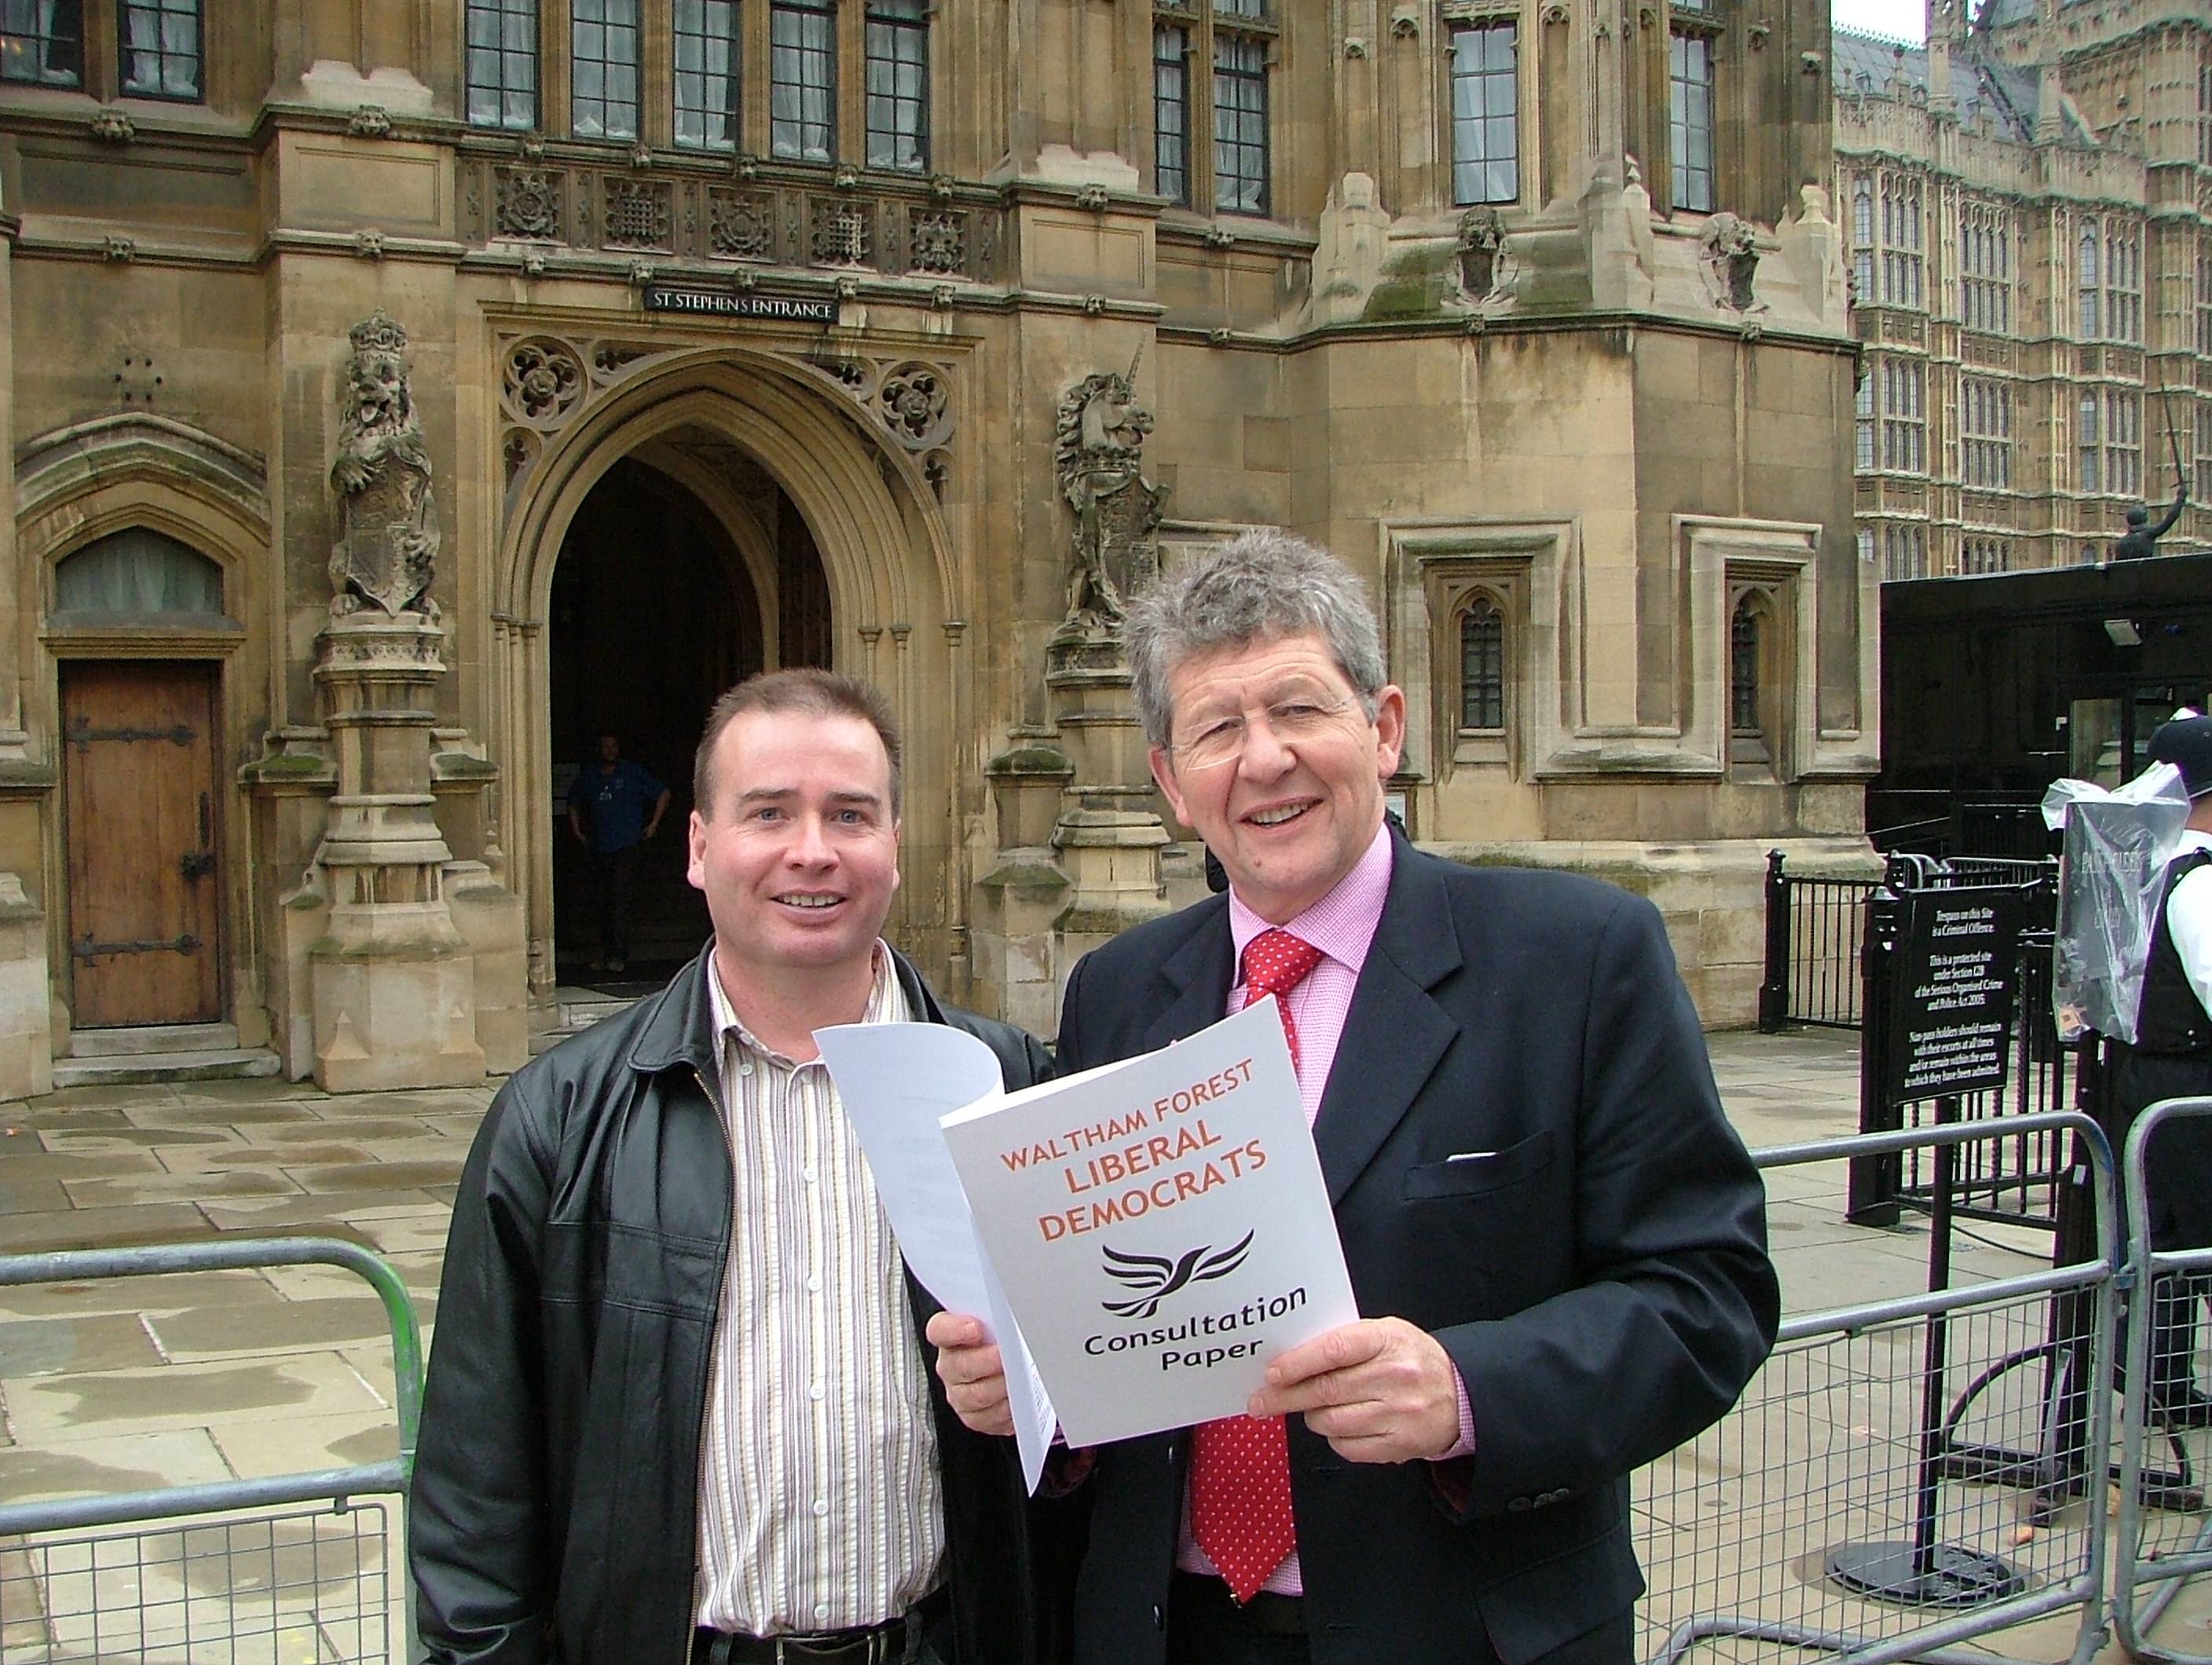 Cllr James O'Rourke launches the Waltham Forest resident consultation at parliament with Don Foster MP